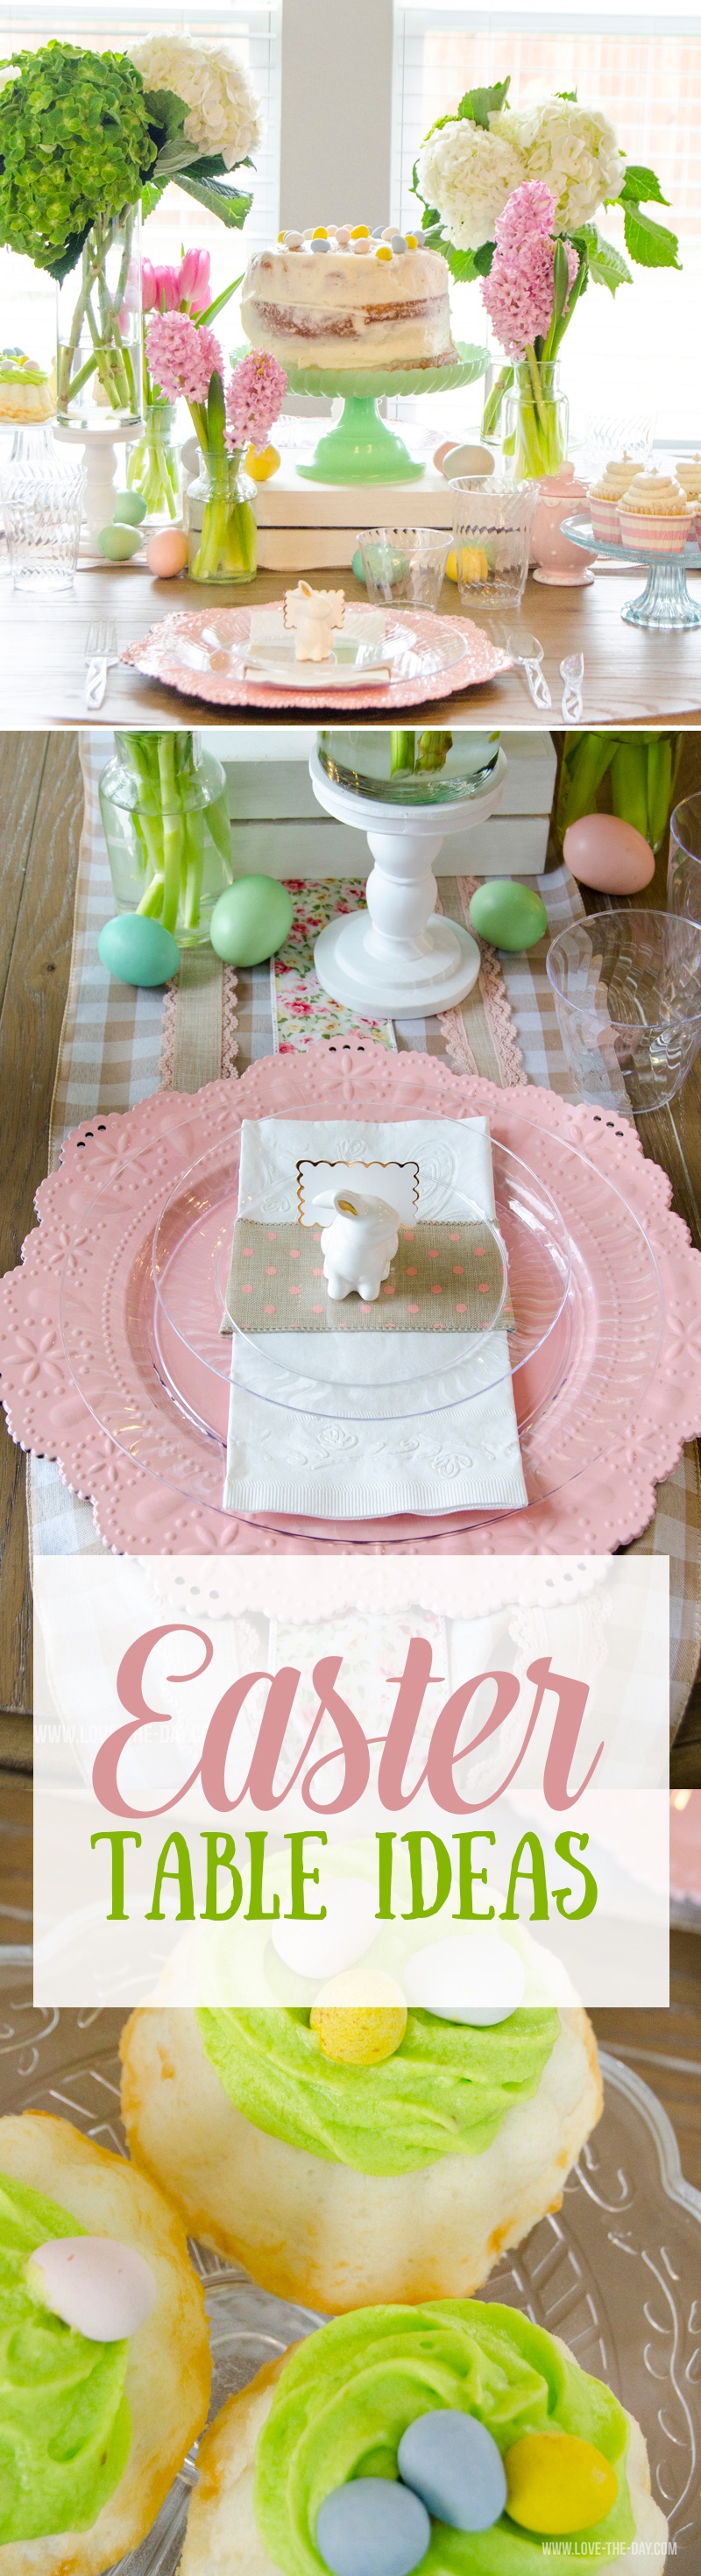 Easy Easter Table Decorating Ideas by Lindi Haws of Love The Day